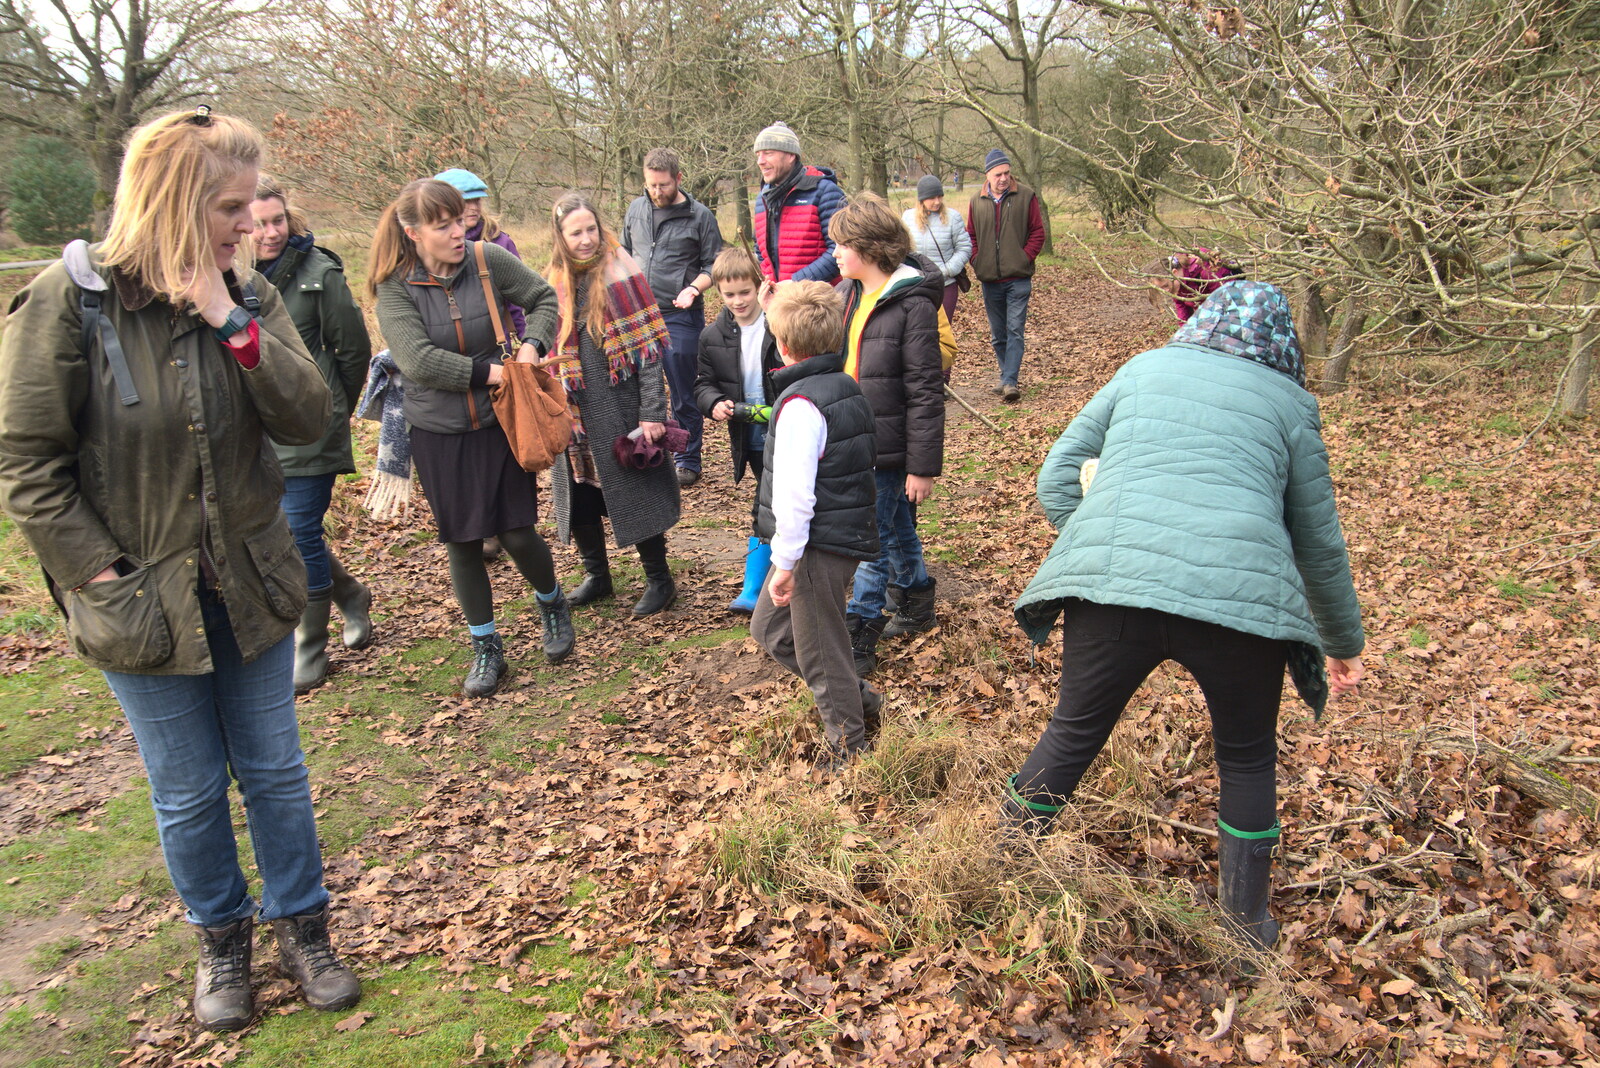 The group piles up by the intersting mushrooms from A Walk Around Knettishall Heath, Thetford, Norfolk - 2nd January 2022